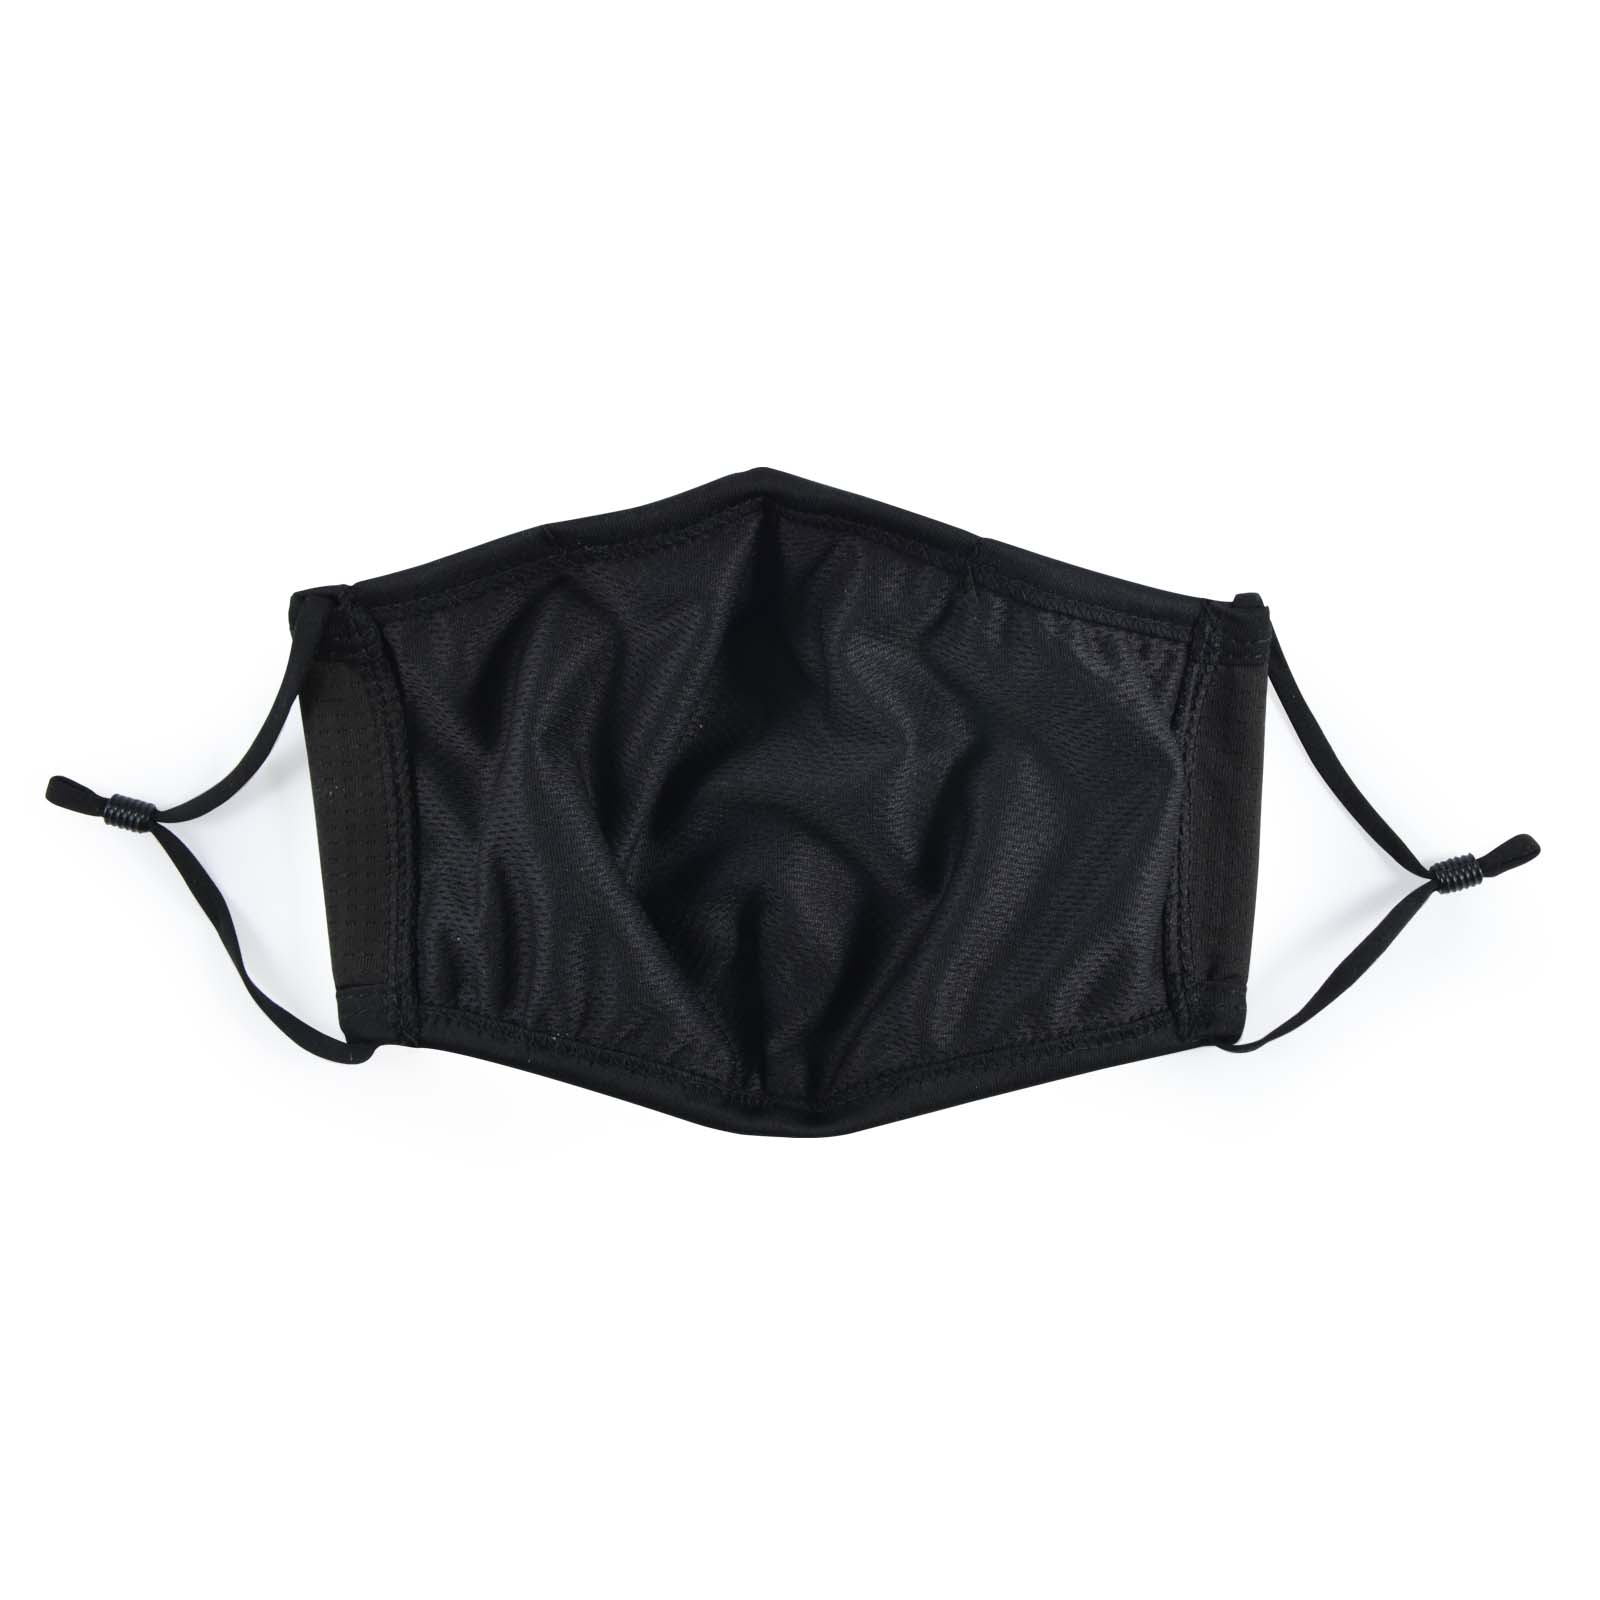 Promotional Cooling Face Mask Online In Perth